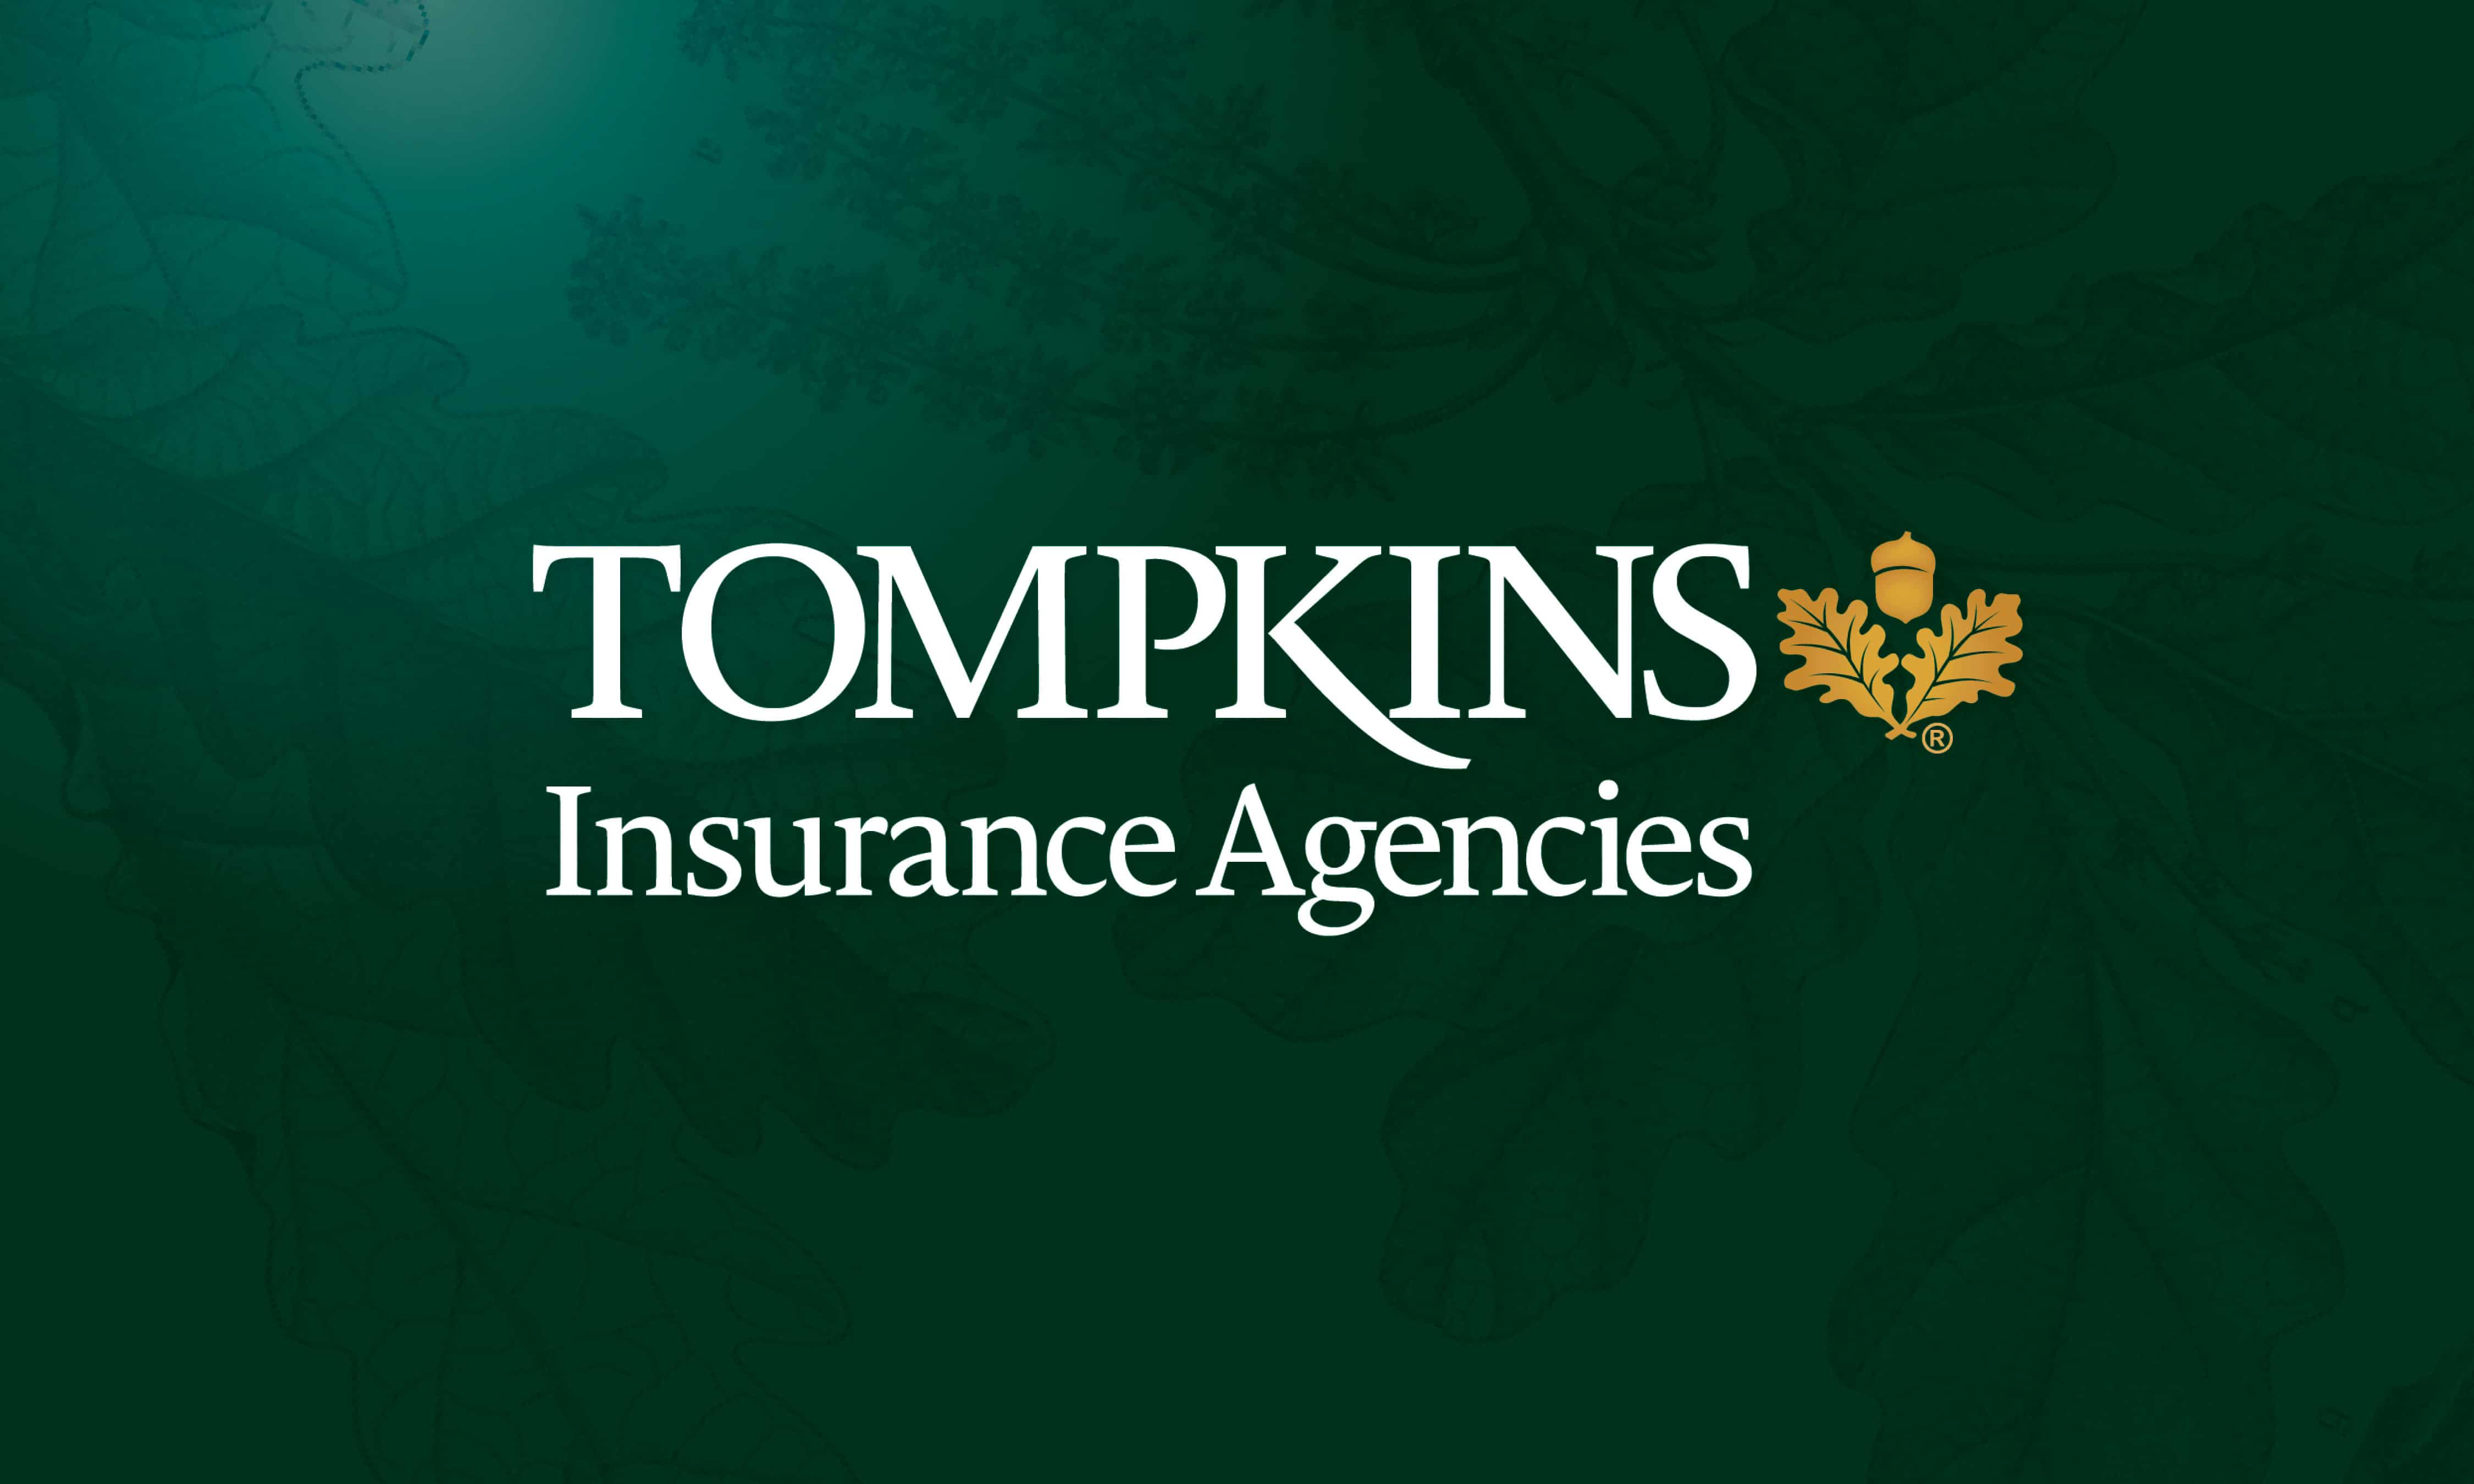 Tompkins Insurance earns ‘best practices’ agency title for fifth year